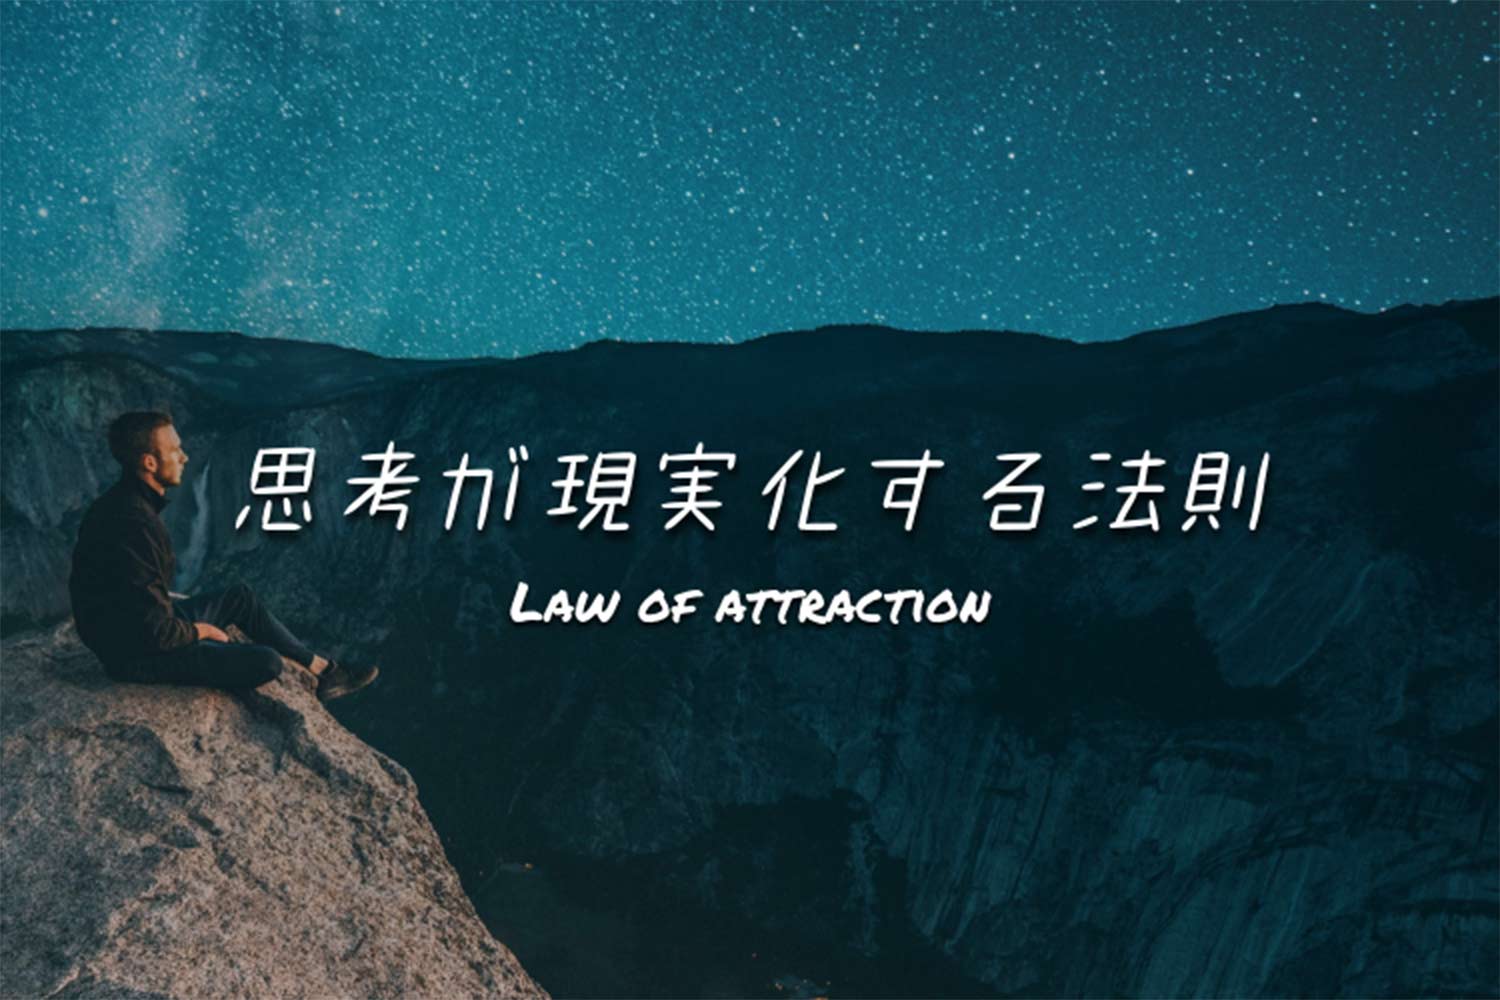 Law of attraction thumbnail